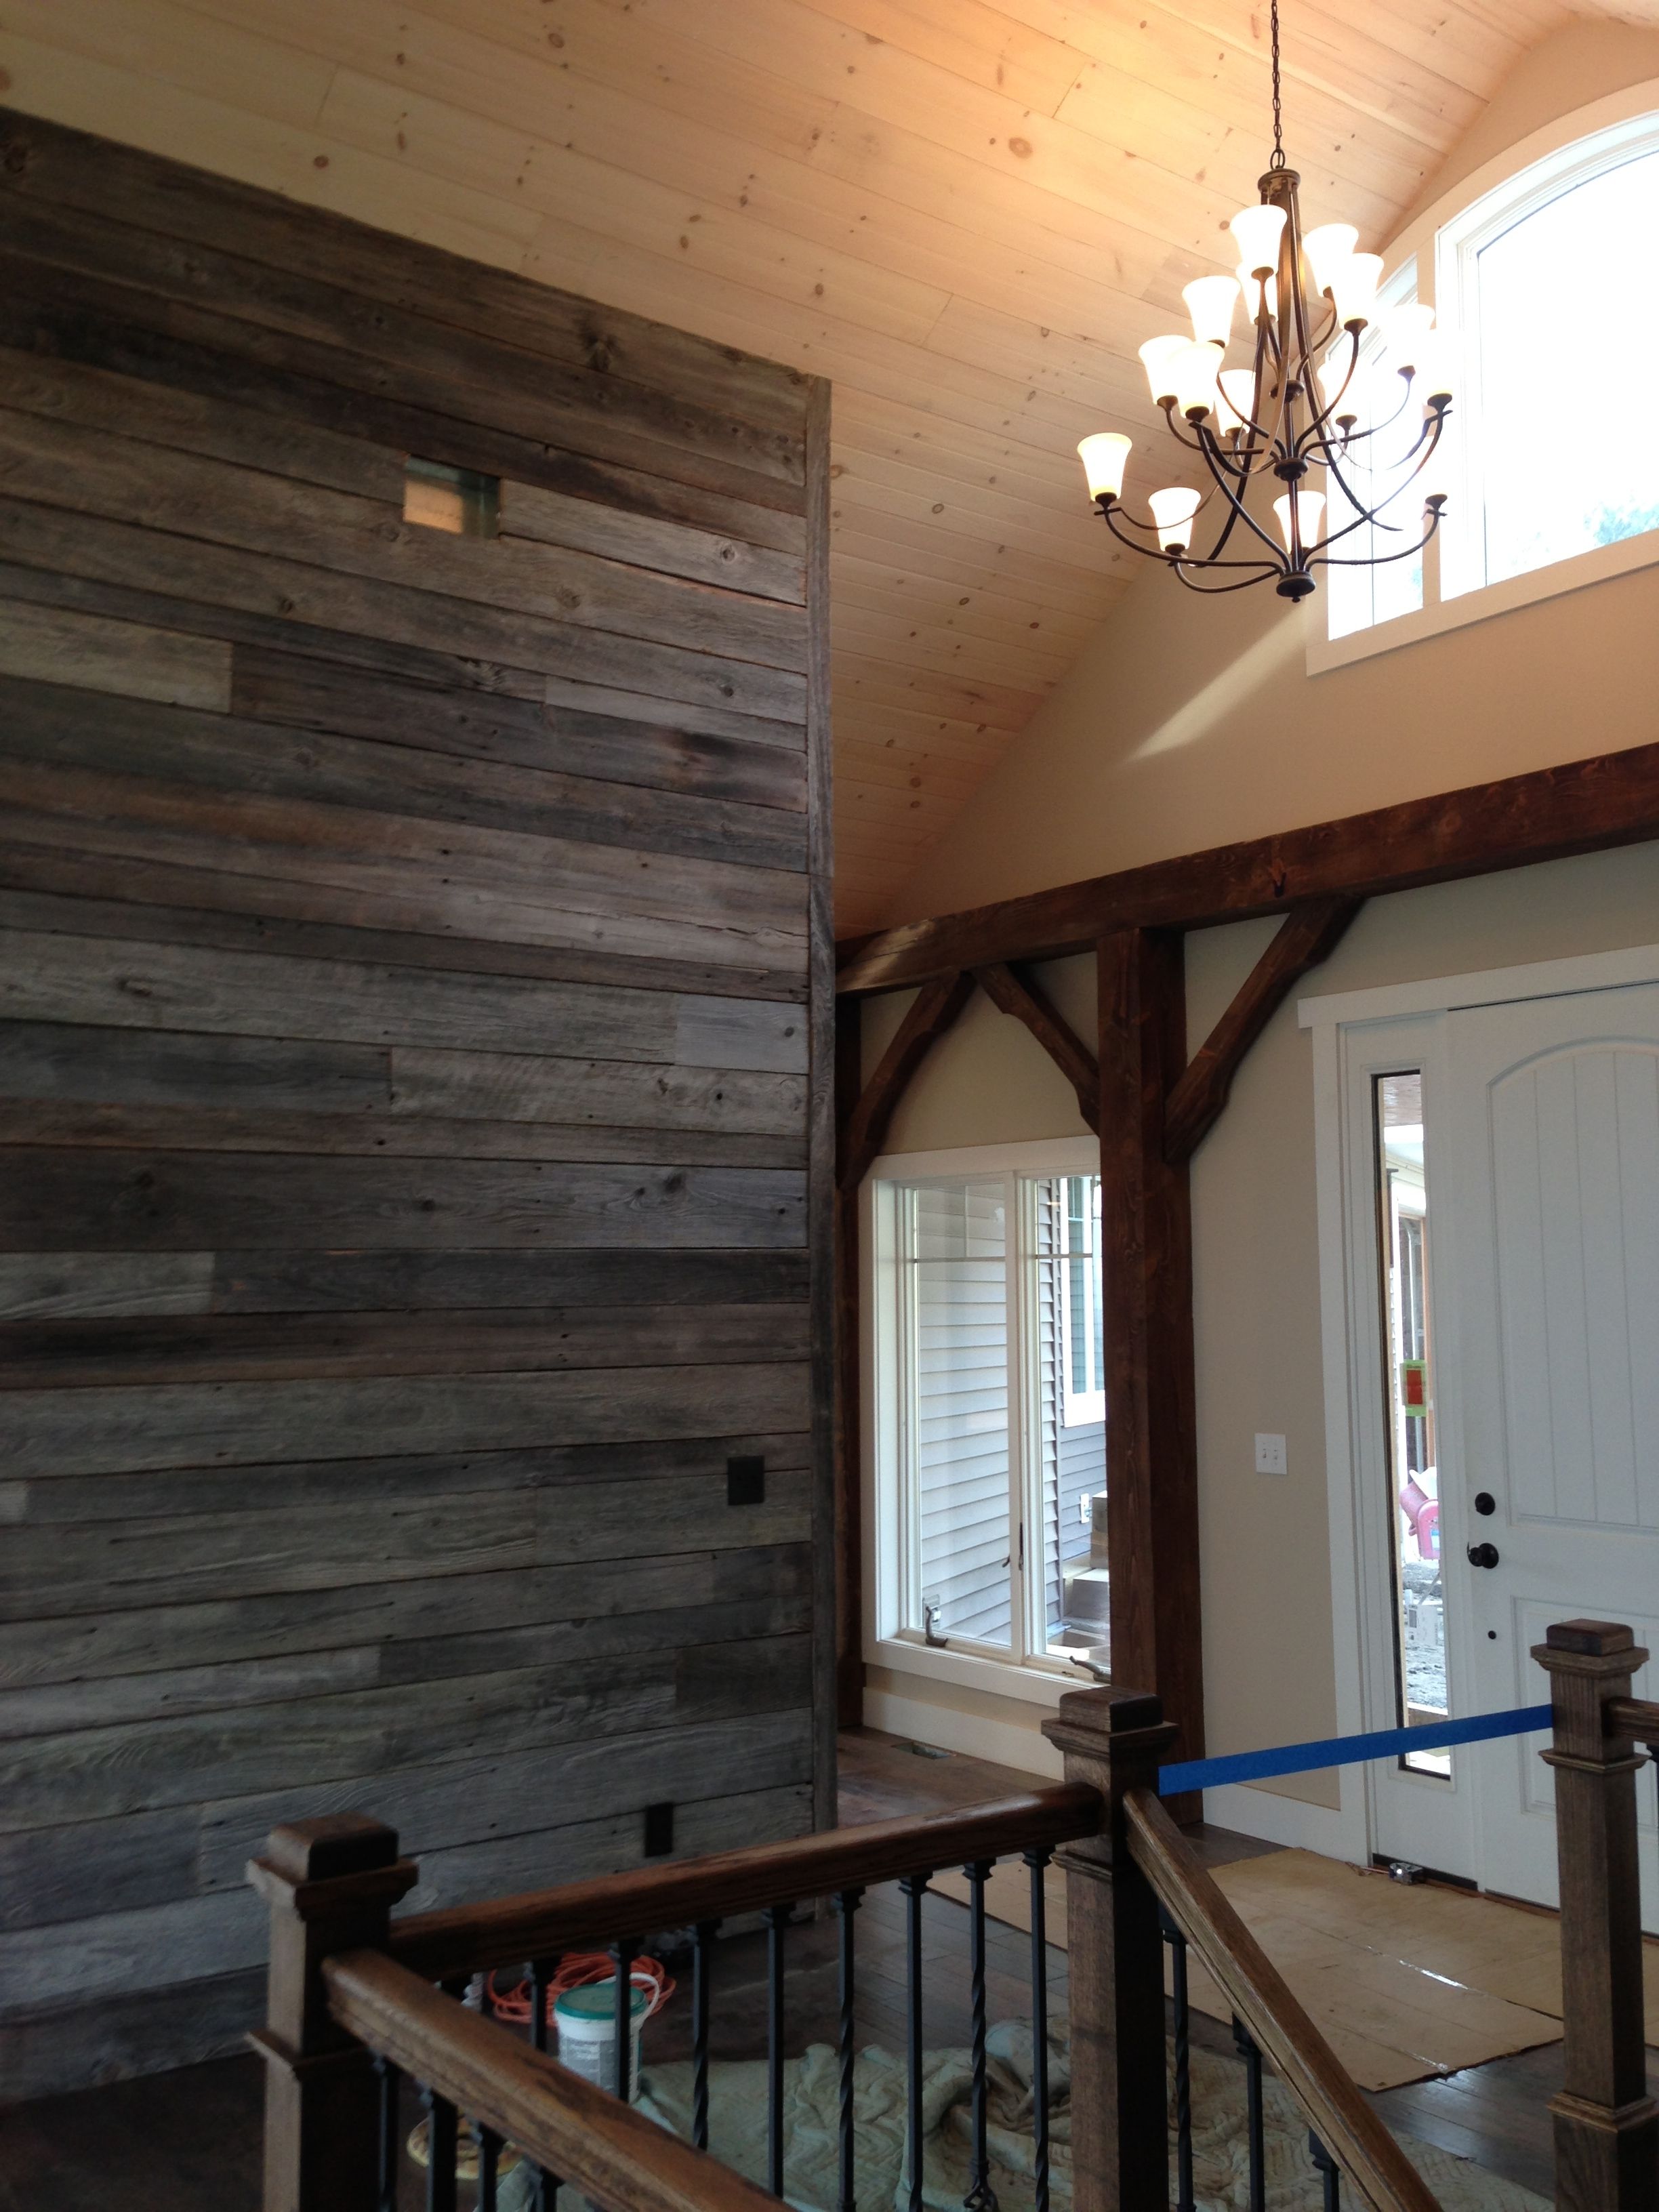 Reclaimed Barnwood Accent Wall In Entry Way Of Reclaimed Barnwood Intended For Most Recently Released Entrance Wall Accents (View 1 of 15)